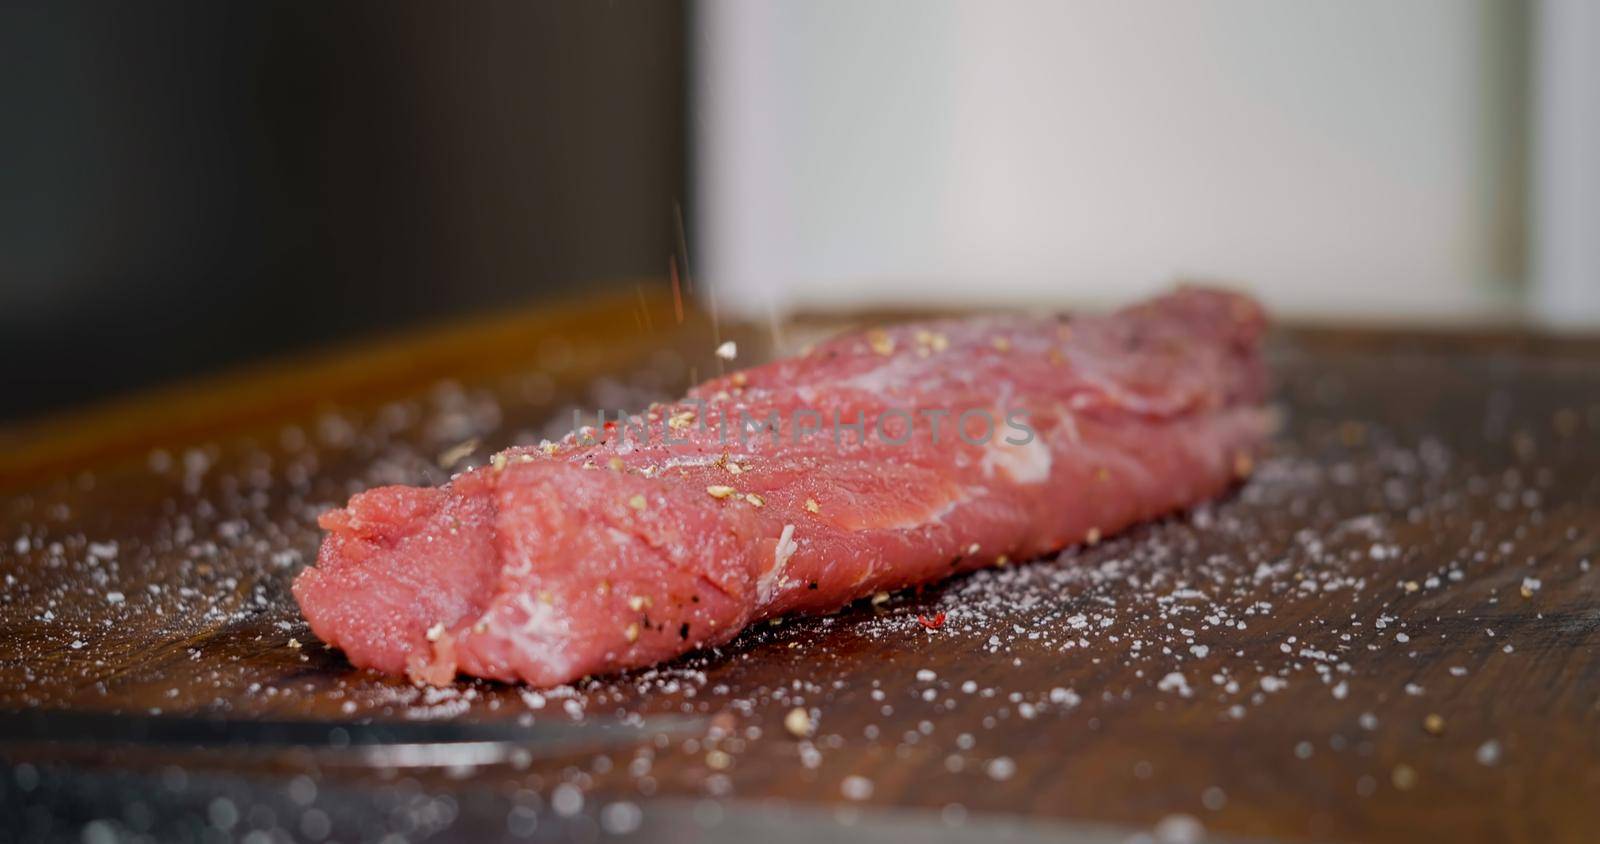 Seasoning Raw Meat on Preparation Table. Chef preparing Meat in Professional Kitchen.